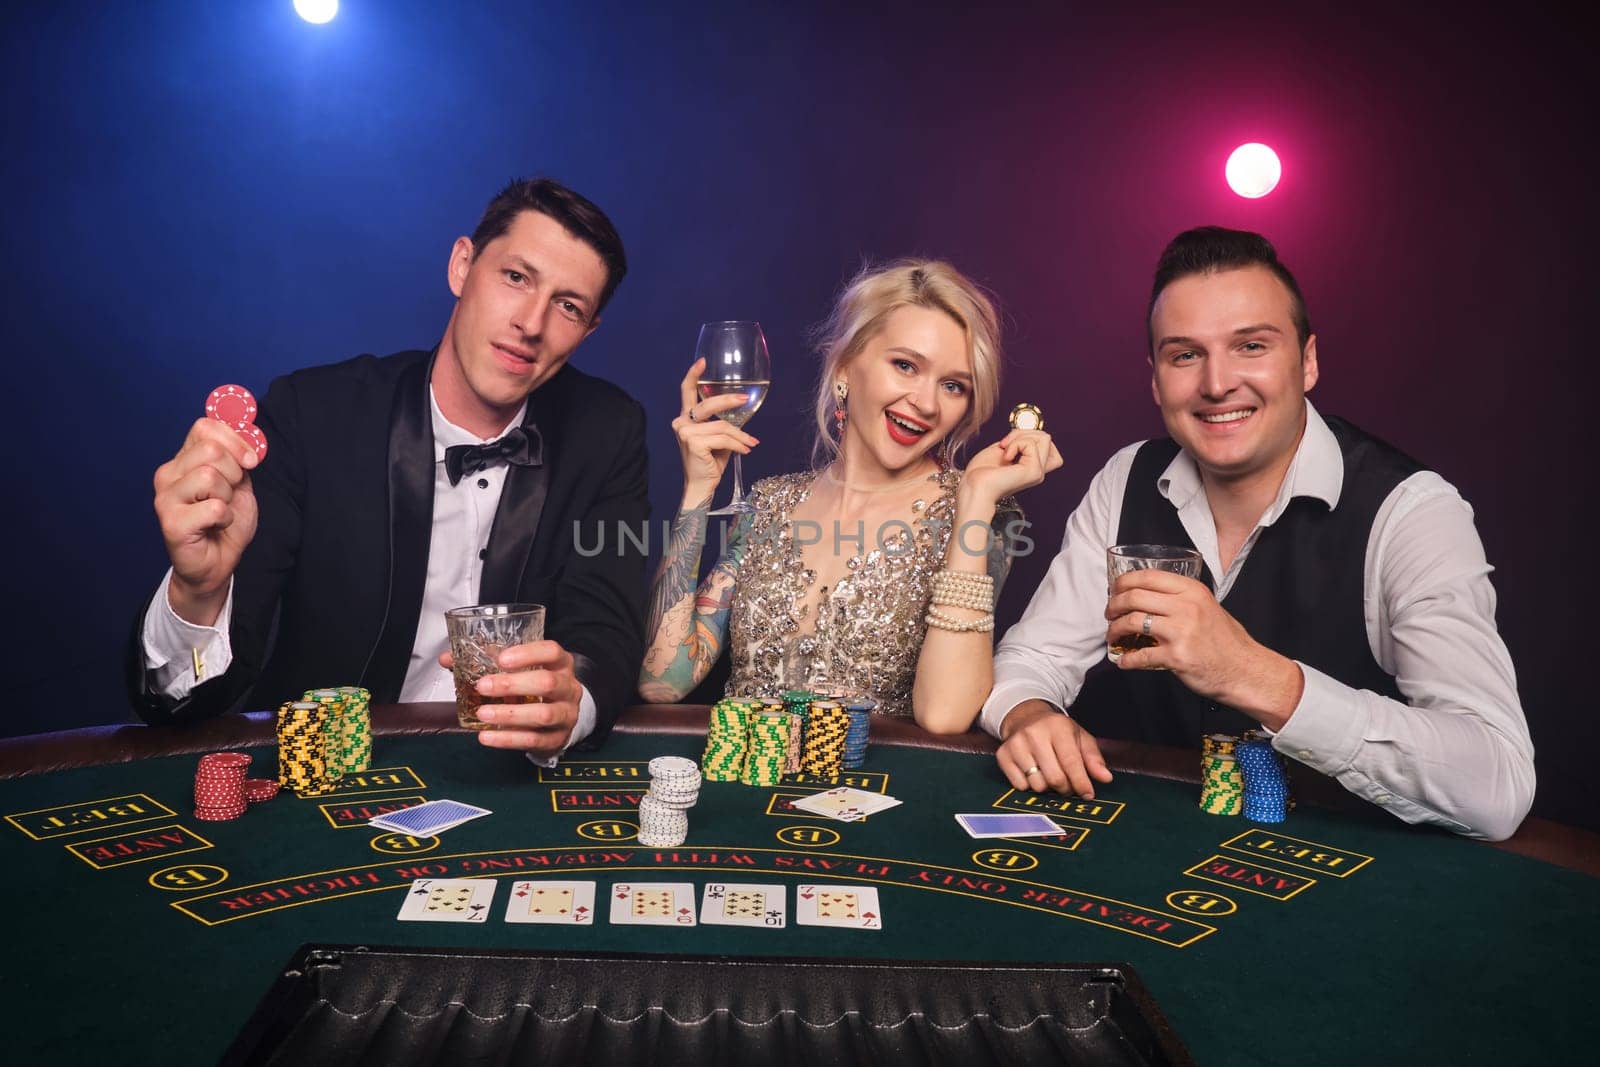 Two good-looking men and amazing maiden are playing poker at casino. Youth are making bets waiting for a big win. They are smiling and looking at the camera sitting at the table against a red and blue backlights on black smoke background. Cards, chips, money, gambling, entertainment concept.